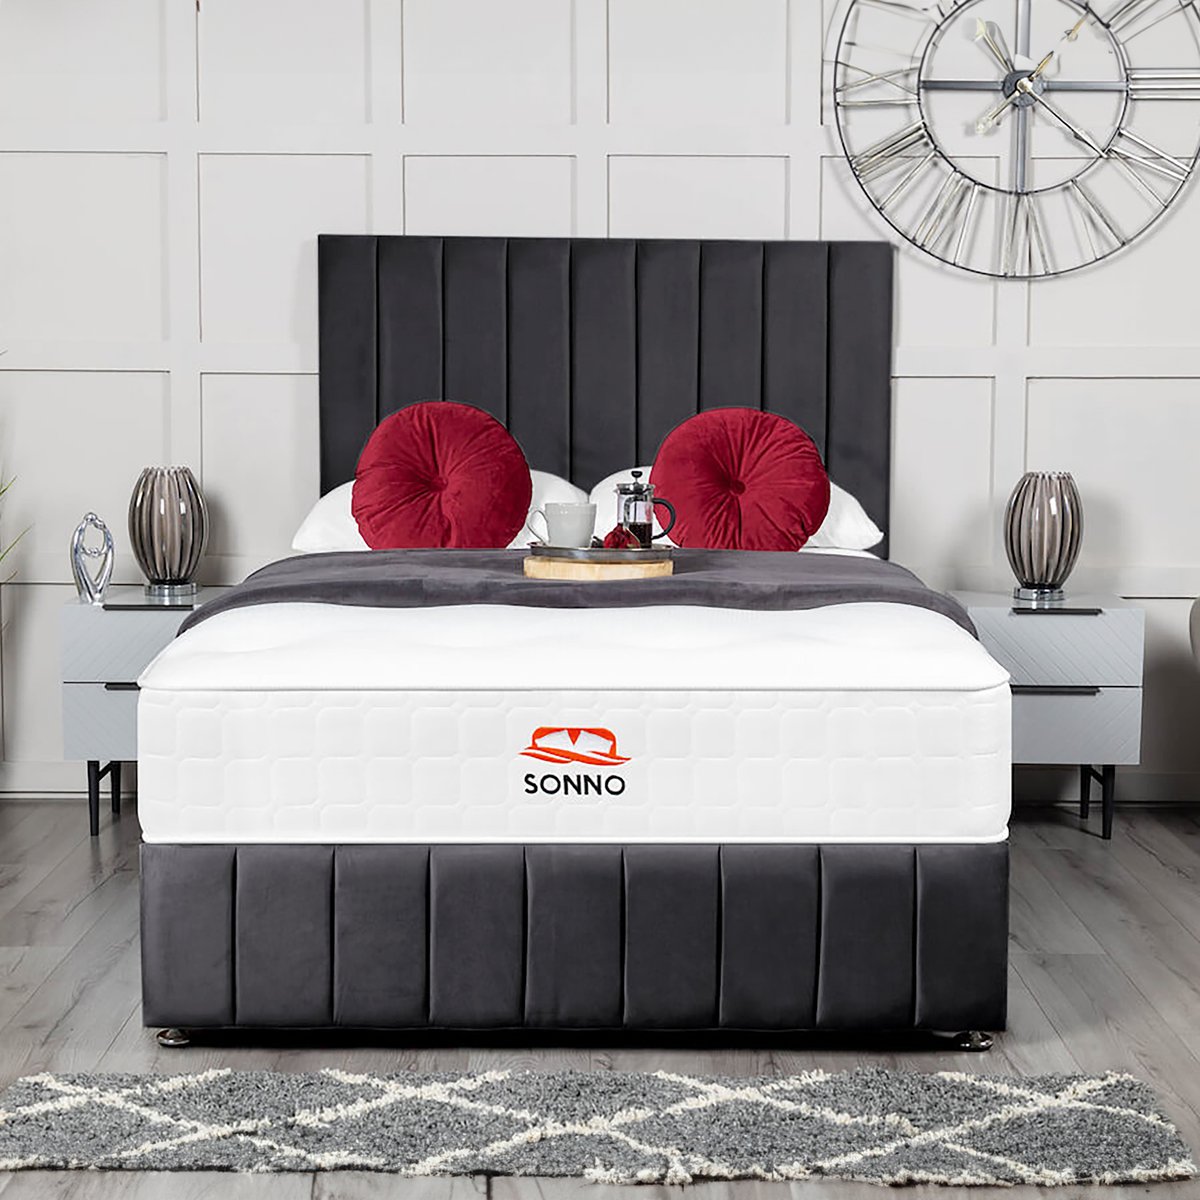 It’s time to declutter and maximise your bedroom’s potential.
Upgrade your sleep experience with Sydney Ottoman Divan Bed today! 📷📷
#homefurnishing #ottomanbeds #soundsleep #madeinuk #sonnobeds